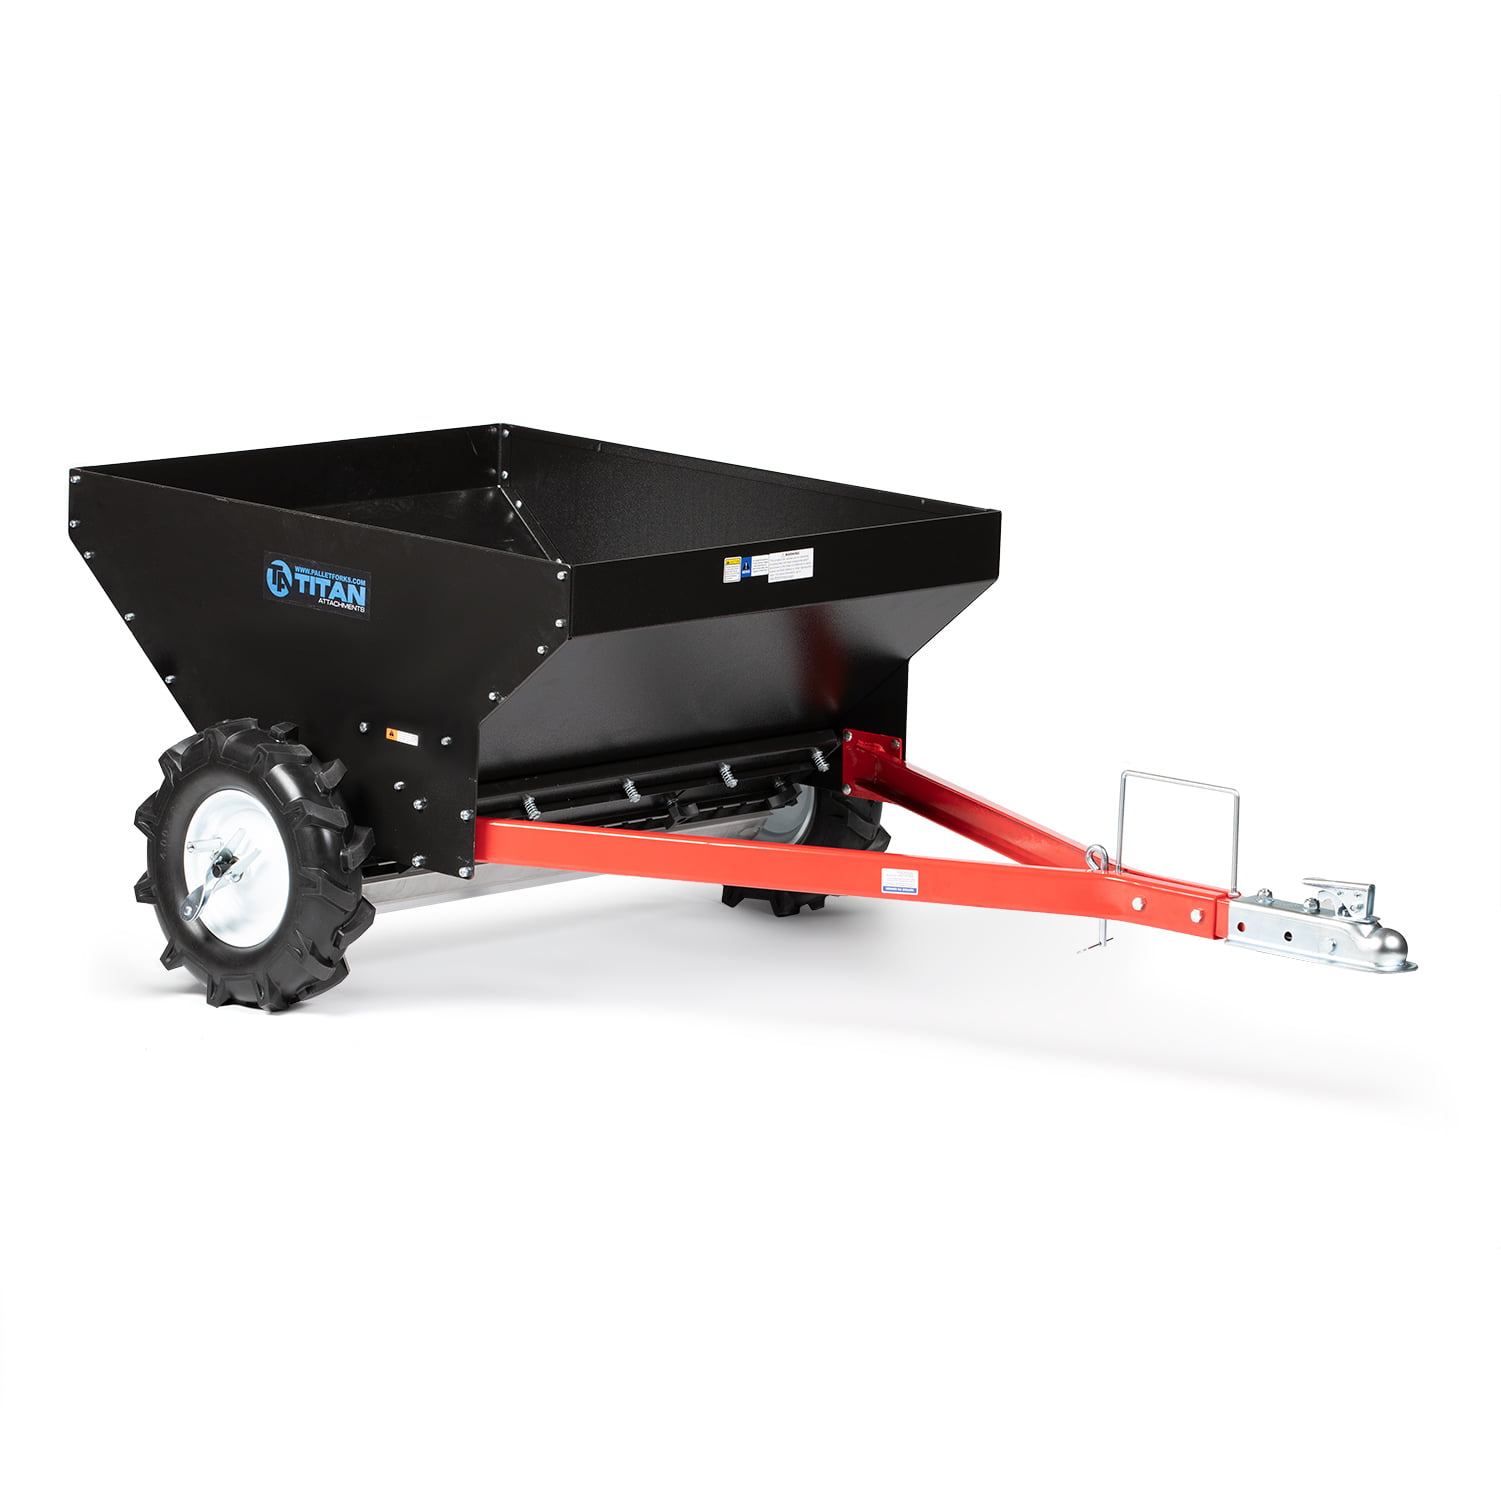 Titan Attachments Compact Manure Spreader for Lawn Tractor and ATV/UTV’s, Utility Tow-Behind